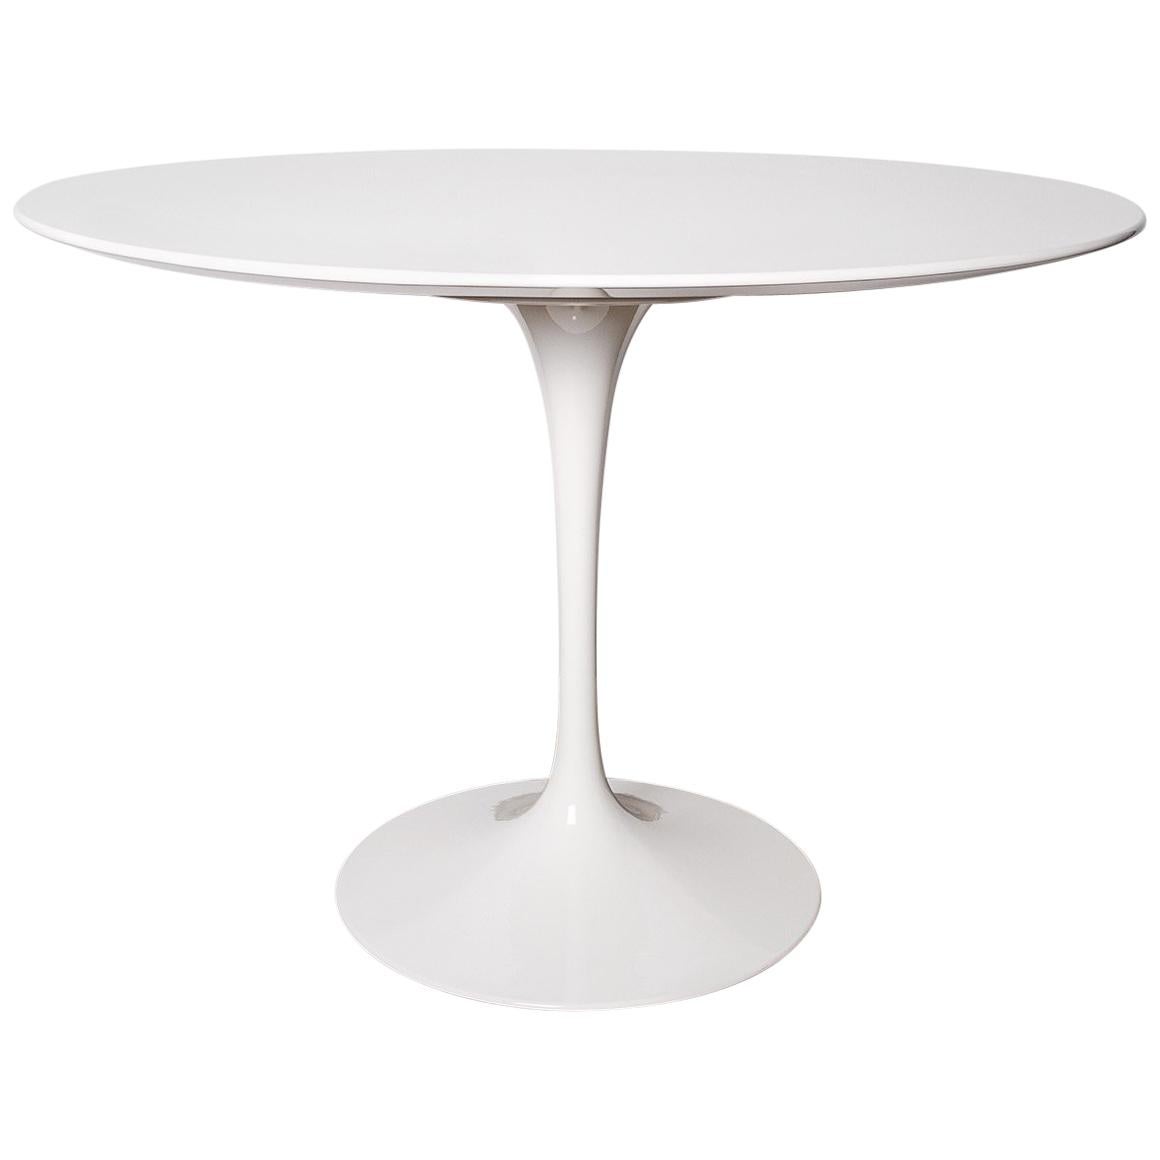 Oval Tulip Table by Eero Saarinen for Knoll For Sale